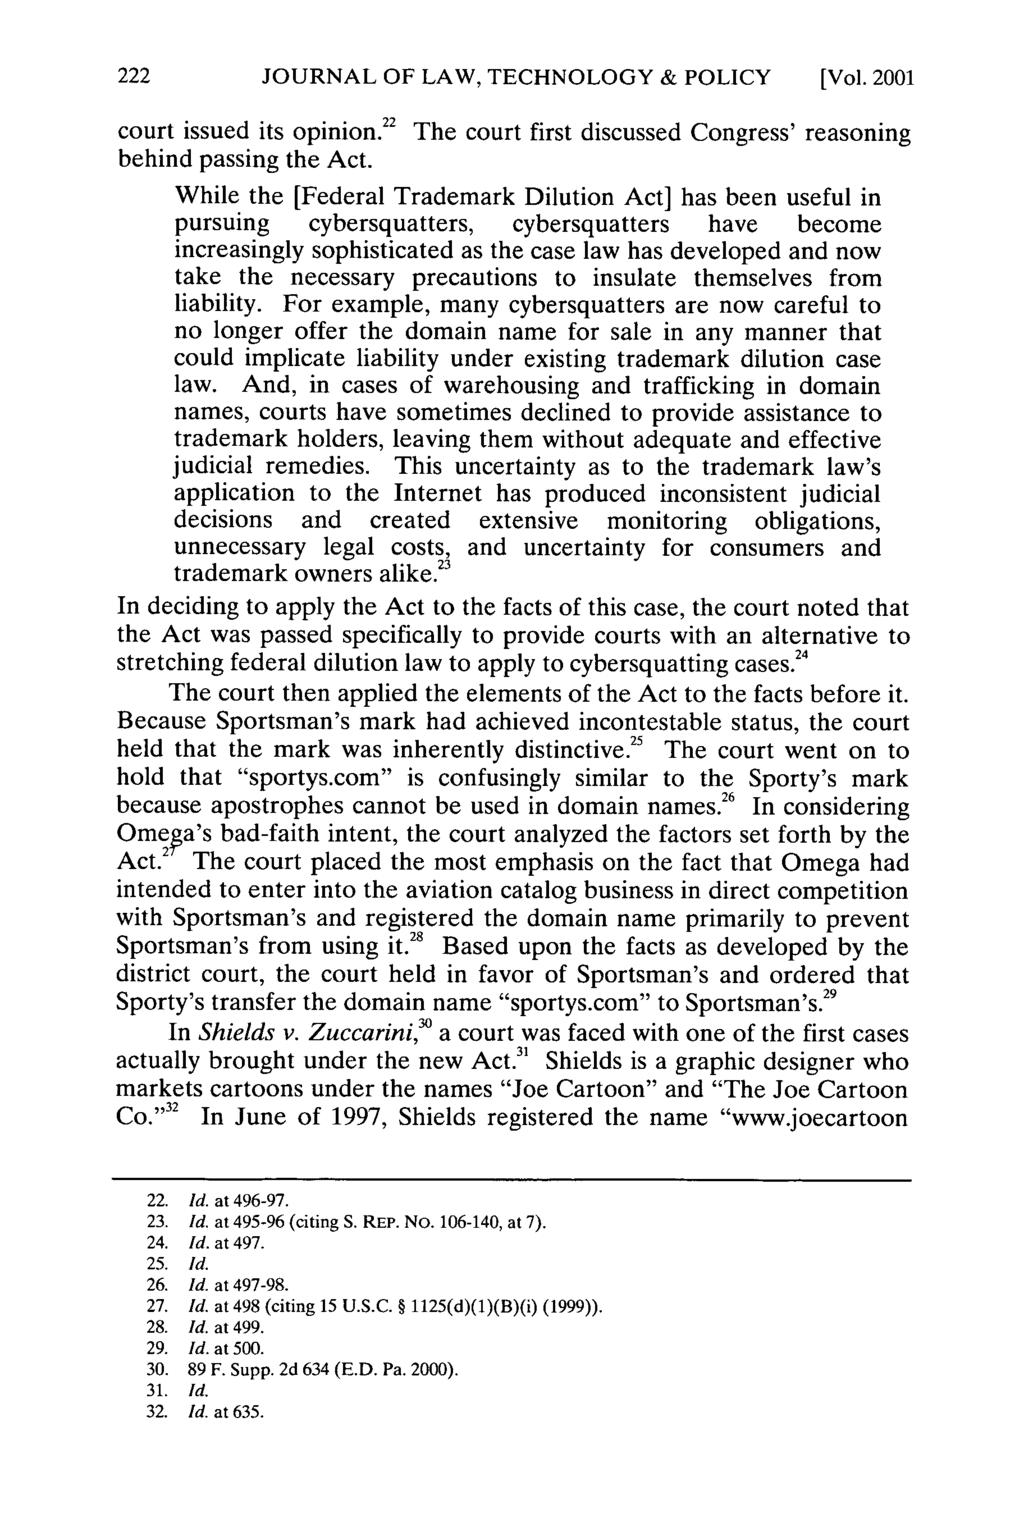 JOURNAL OF LAW, TECHNOLOGY & POLICY [Vol. 2001 court issued its opinion. 22 The court first discussed Congress' reasoning behind passing the Act.